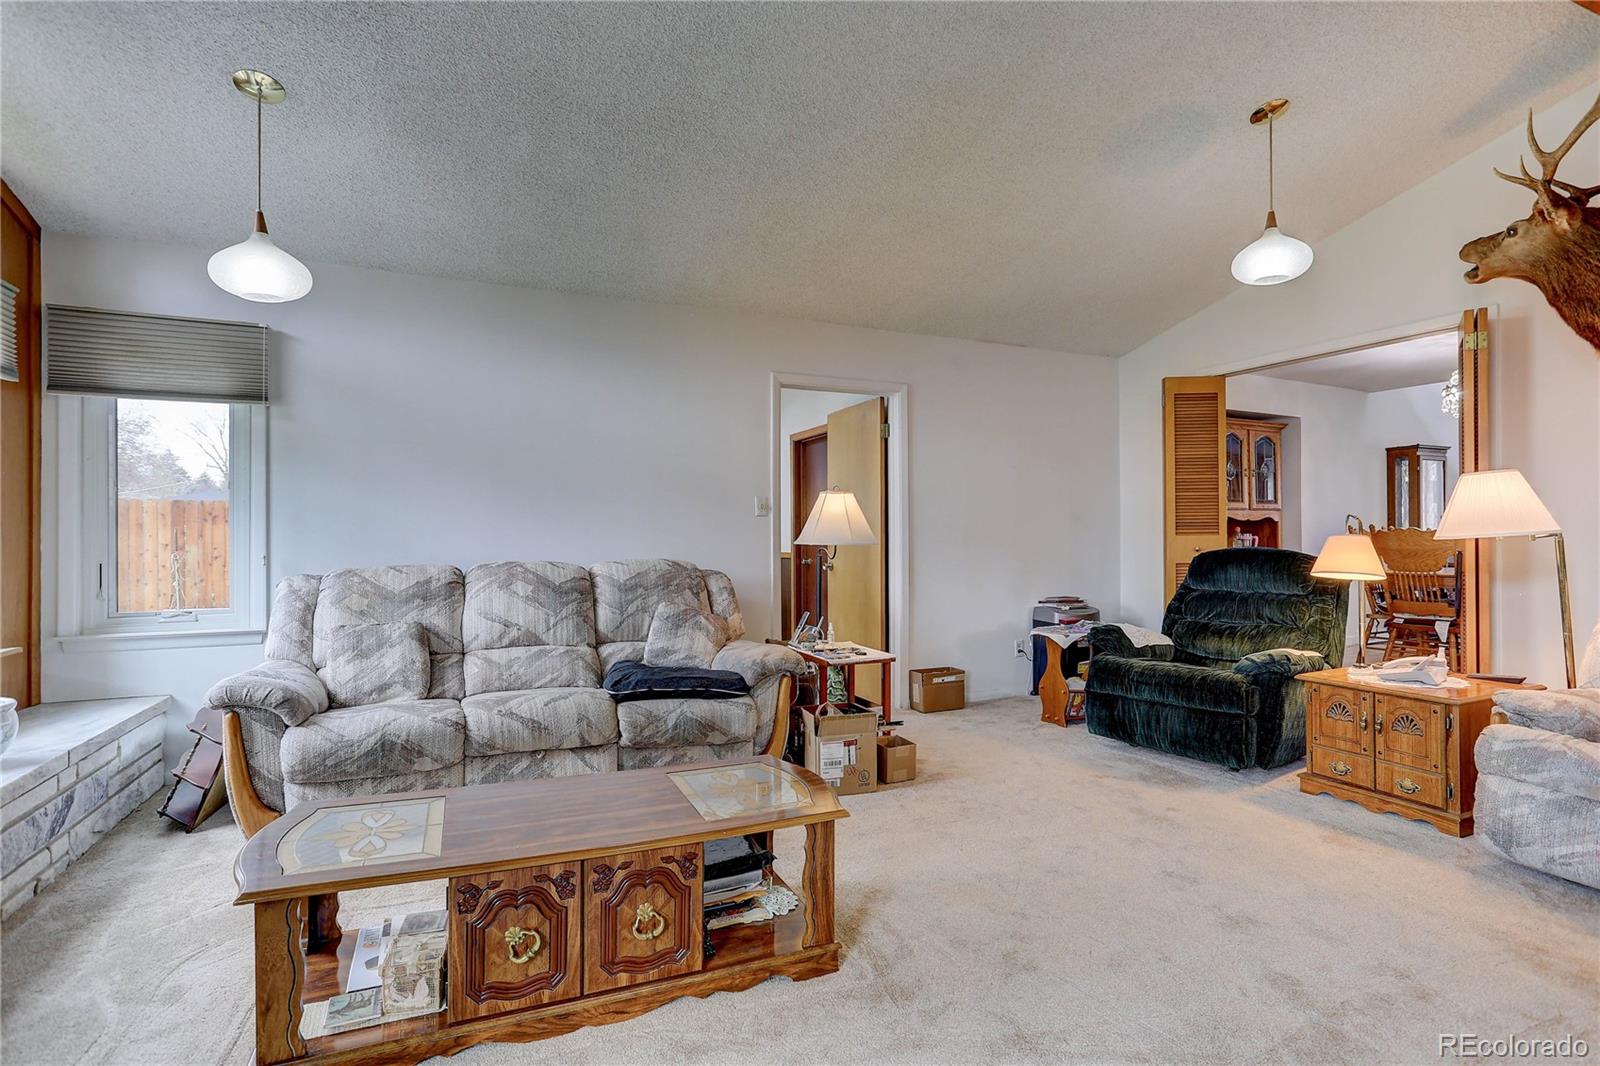 10844 Allendale, Arvada, CO